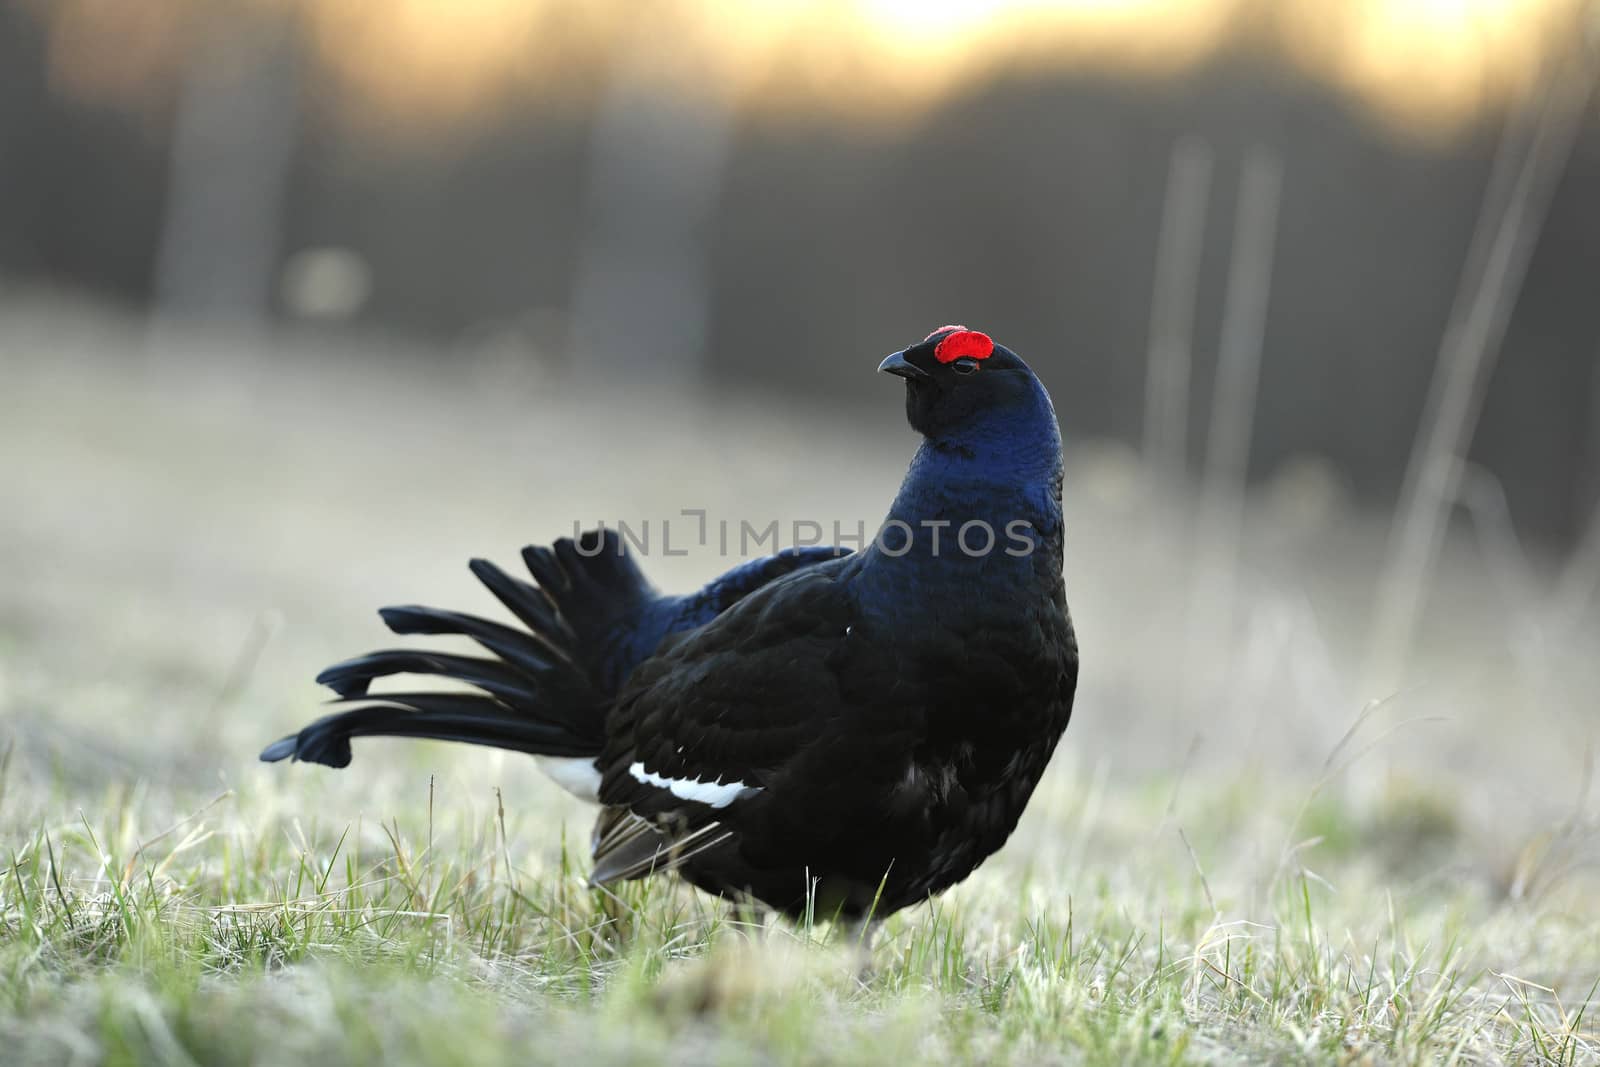 Lekking  black grouse by SURZ